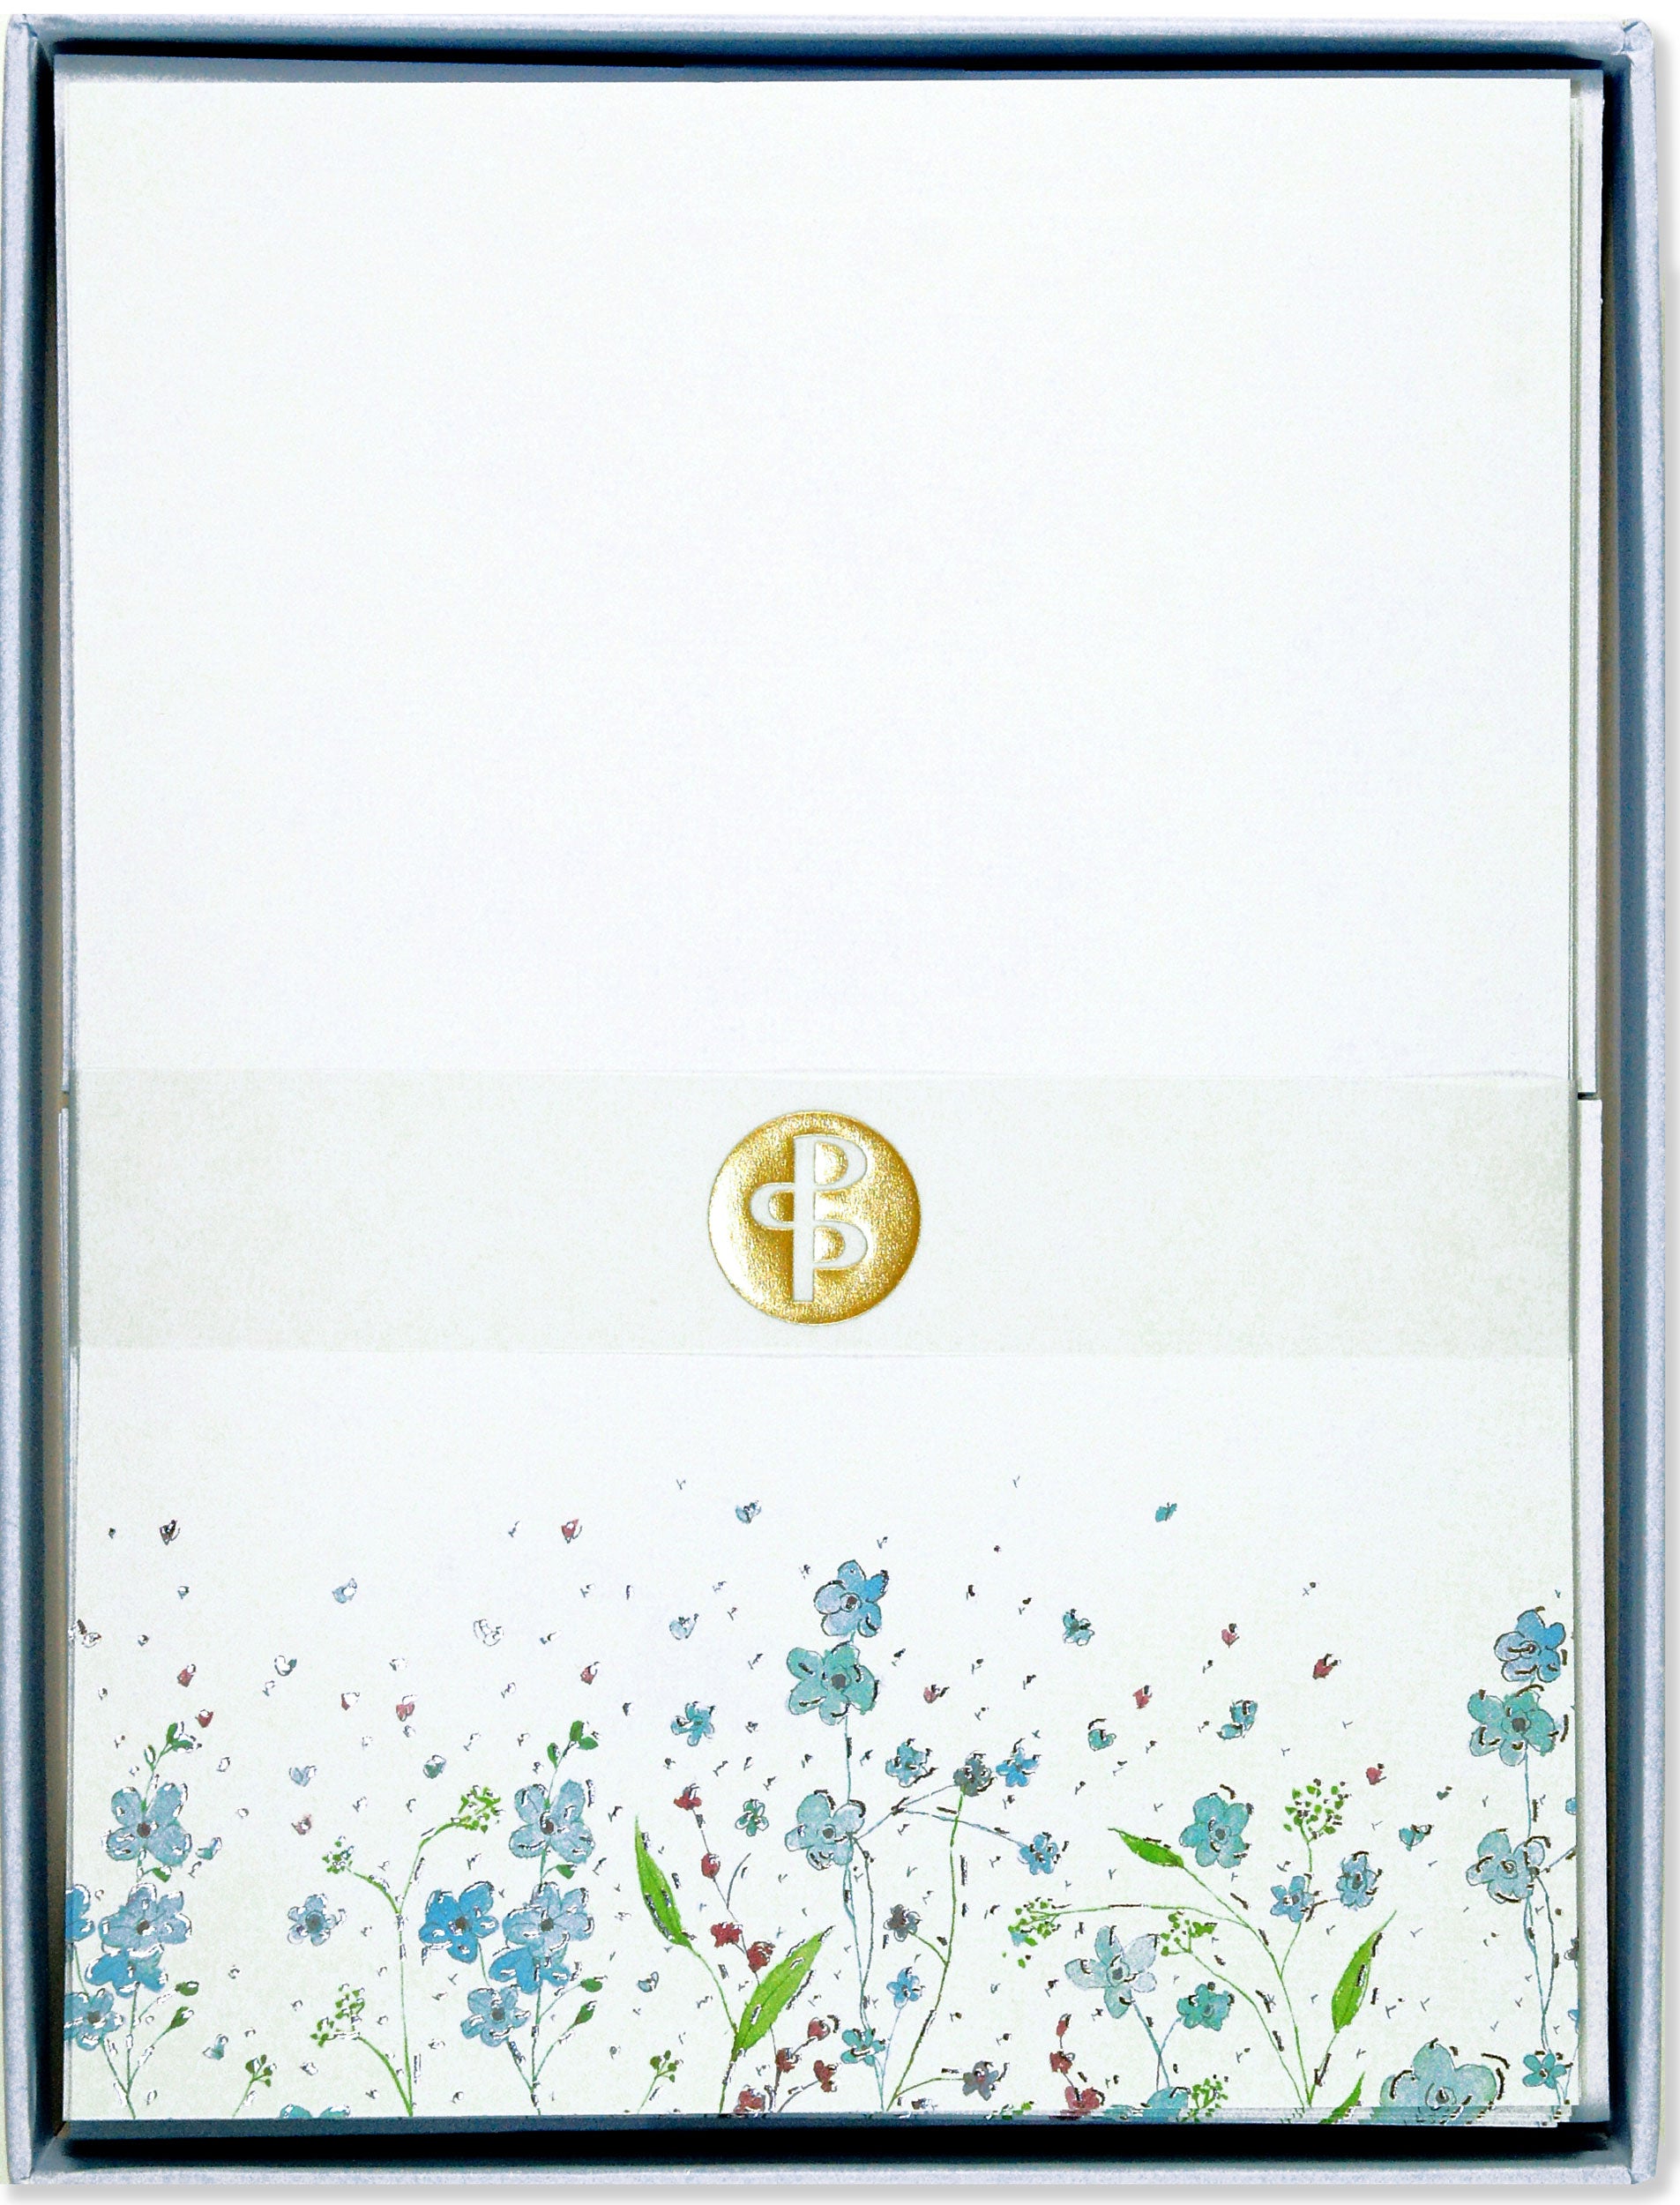 Stationery Paper and Envelopes - Blue Flowers    